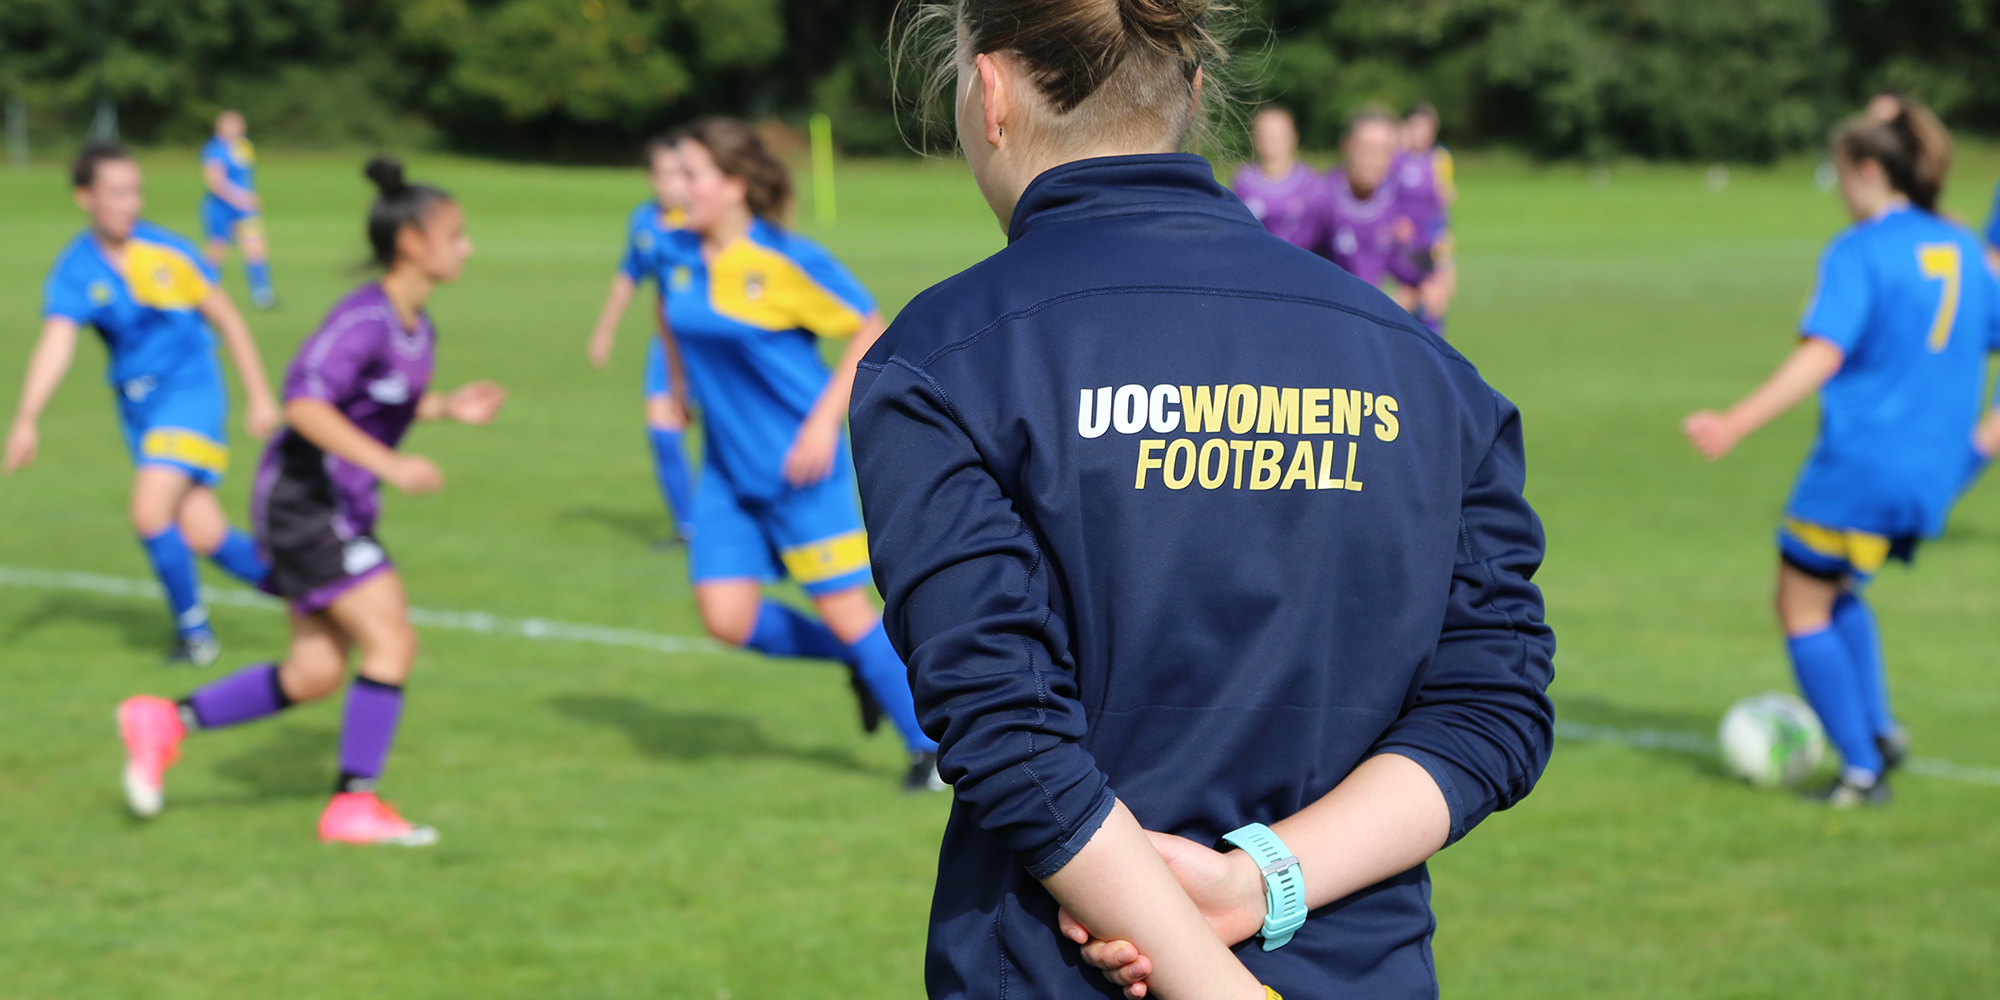 The University of Chichester Institute of Sport offers an extensive Coach Education programme open to both students and staff.